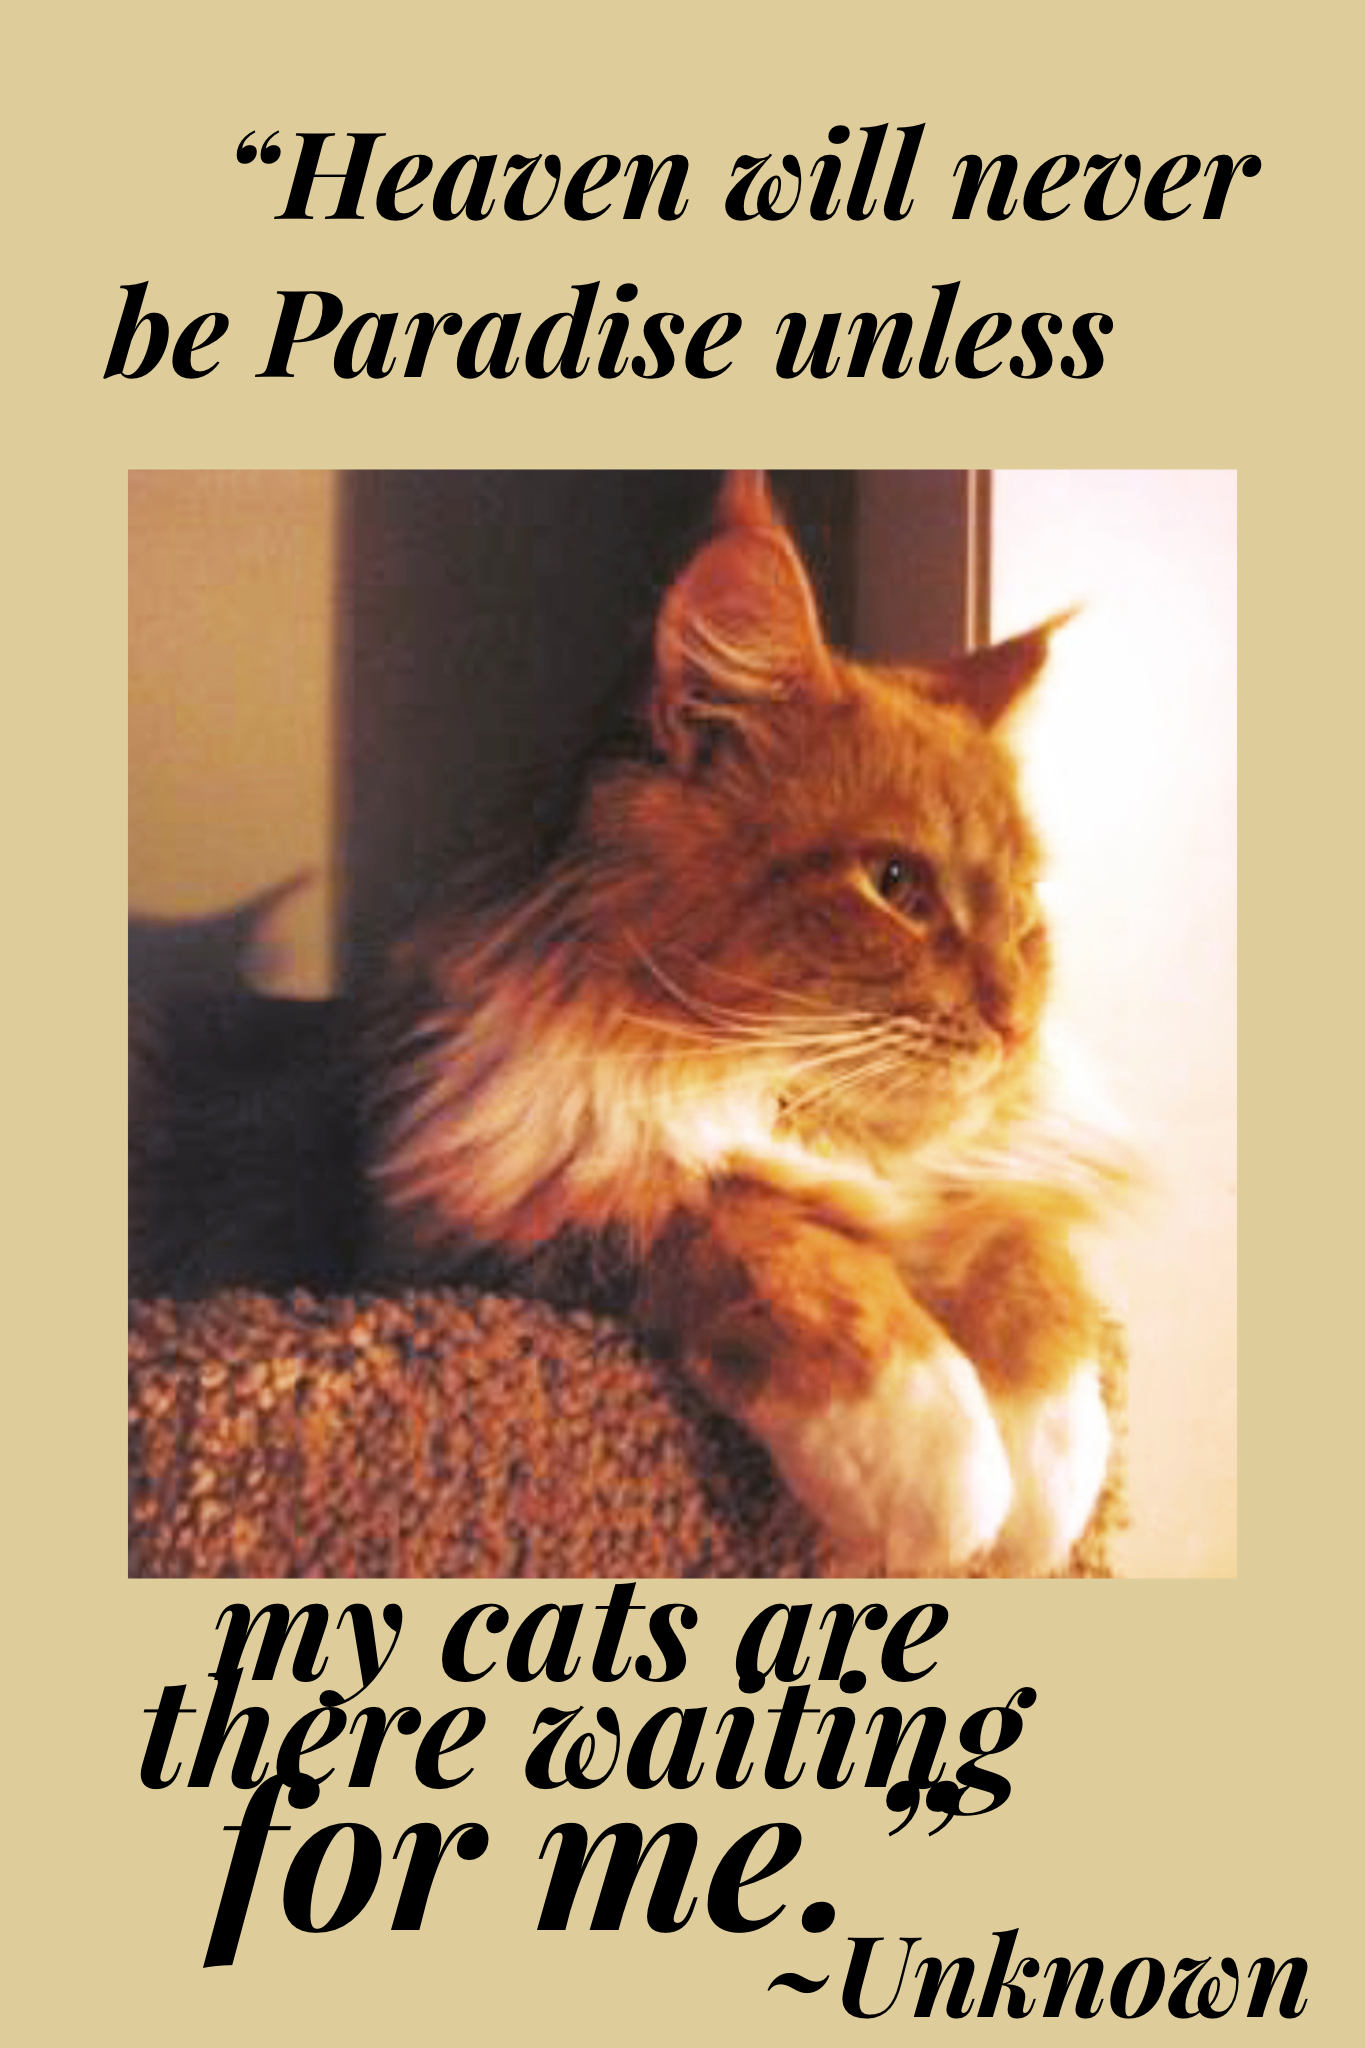 "Heaven will never be Paradise unless my cats are there waiting for me."